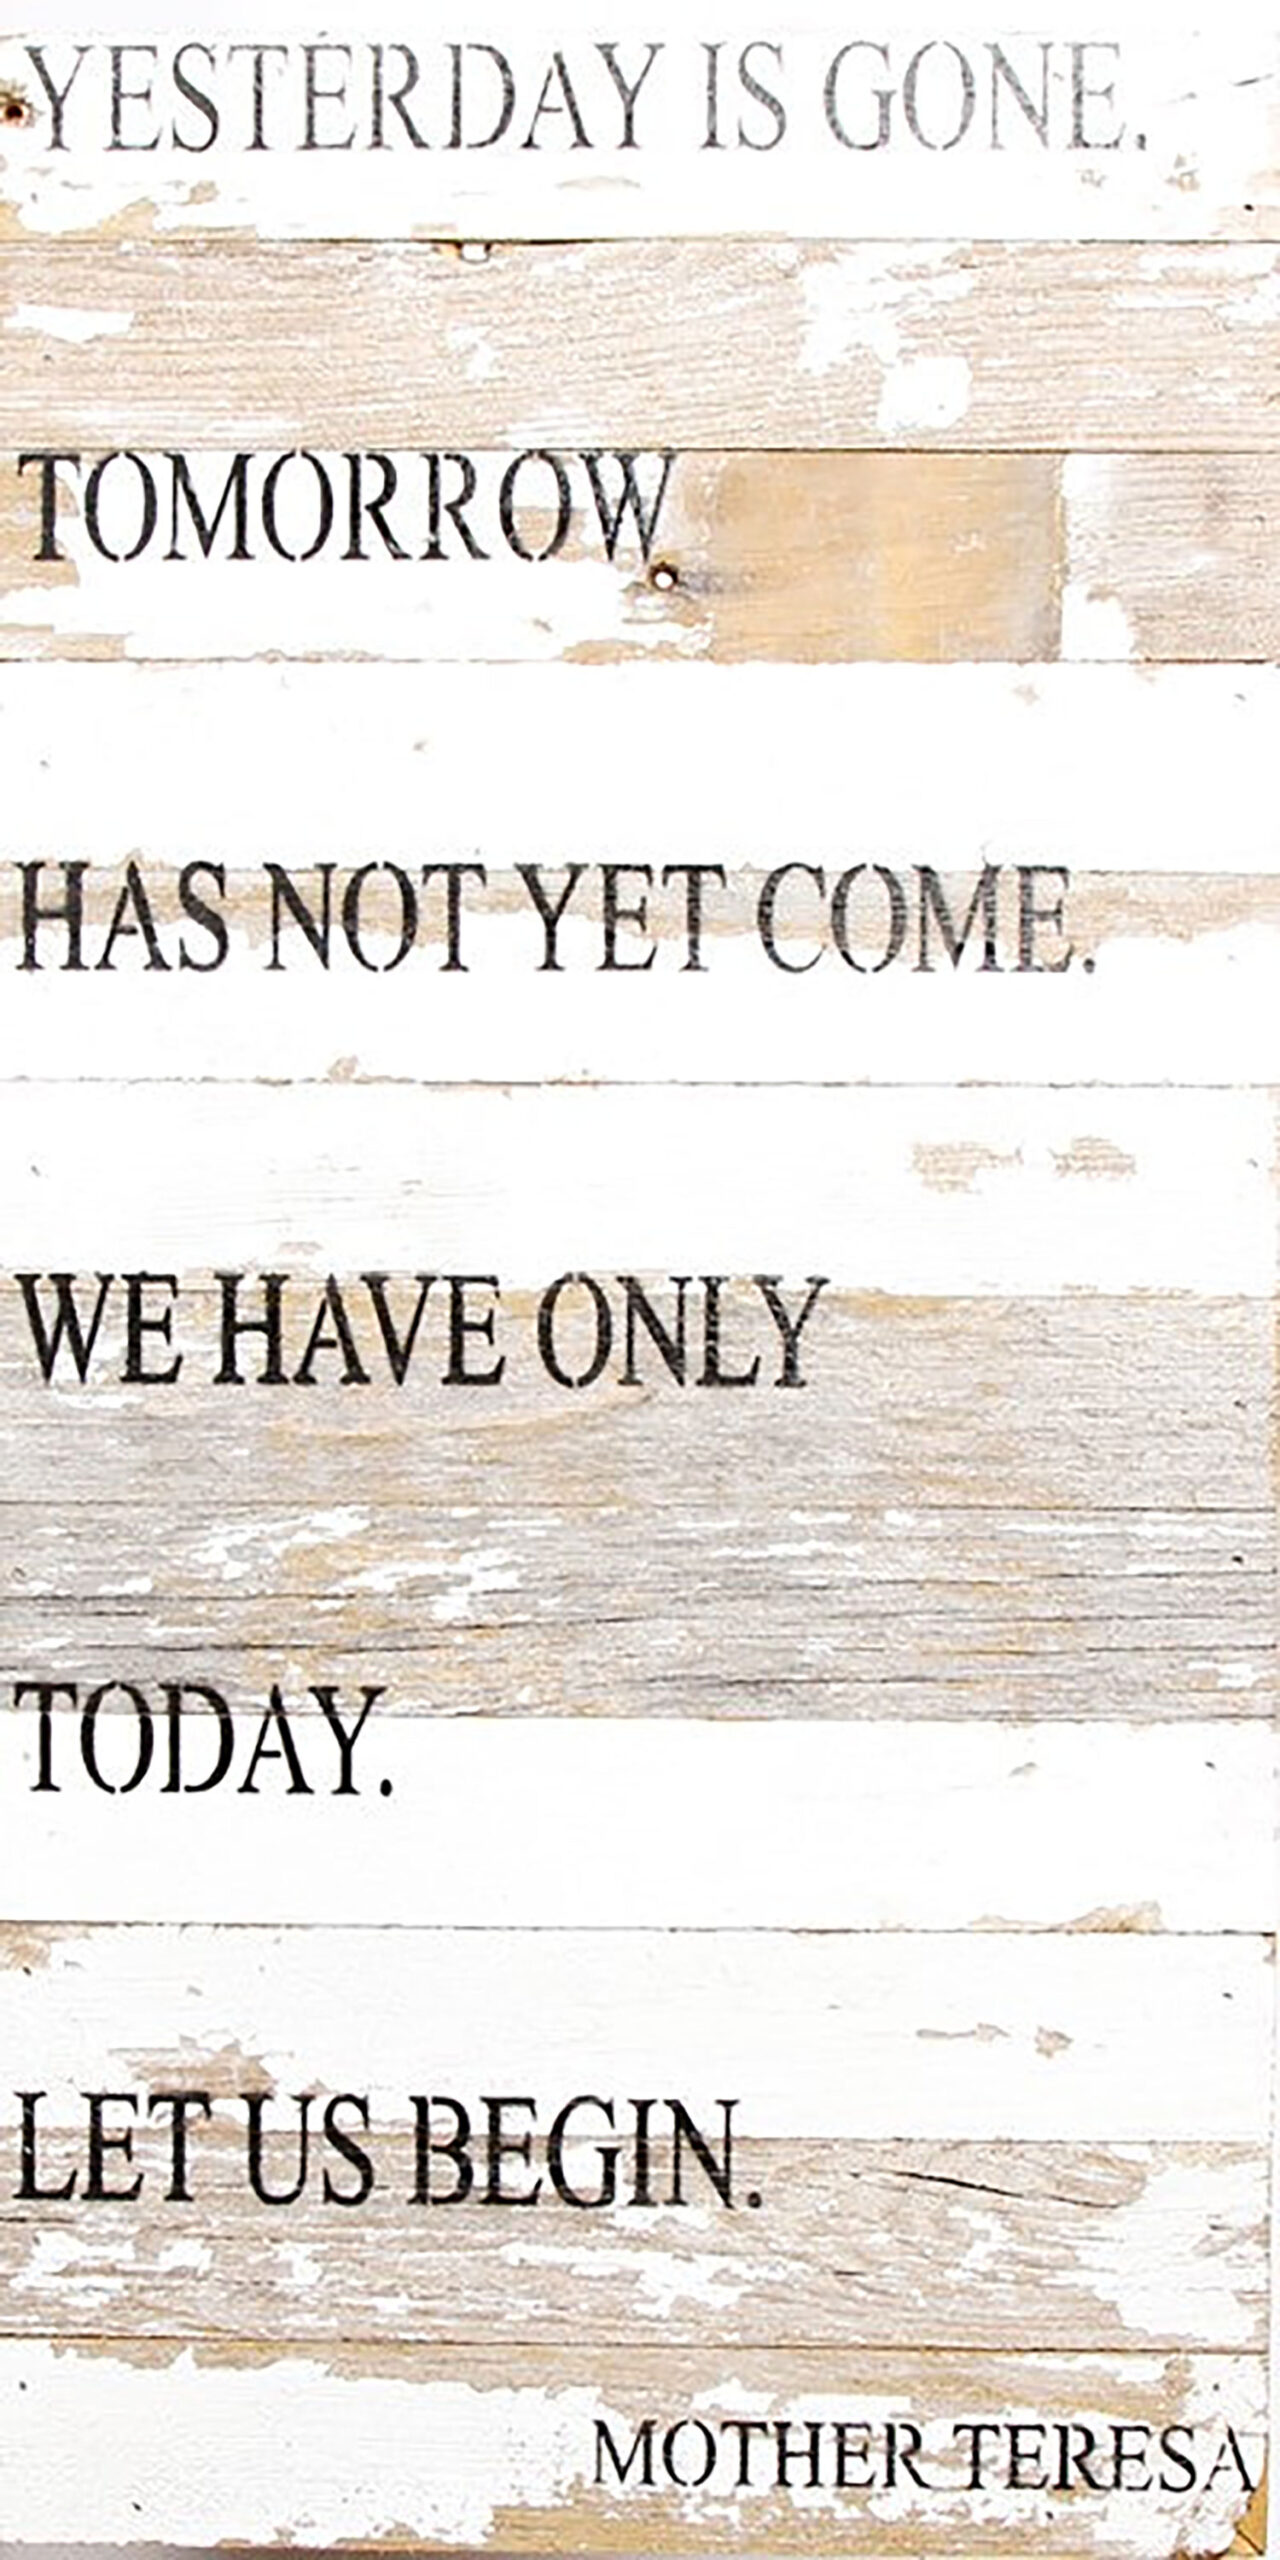 Yesterday is gone. Tomorrow has not yet come. We have only today. Let us begin. / 12"x24" Reclaimed Wood Sign